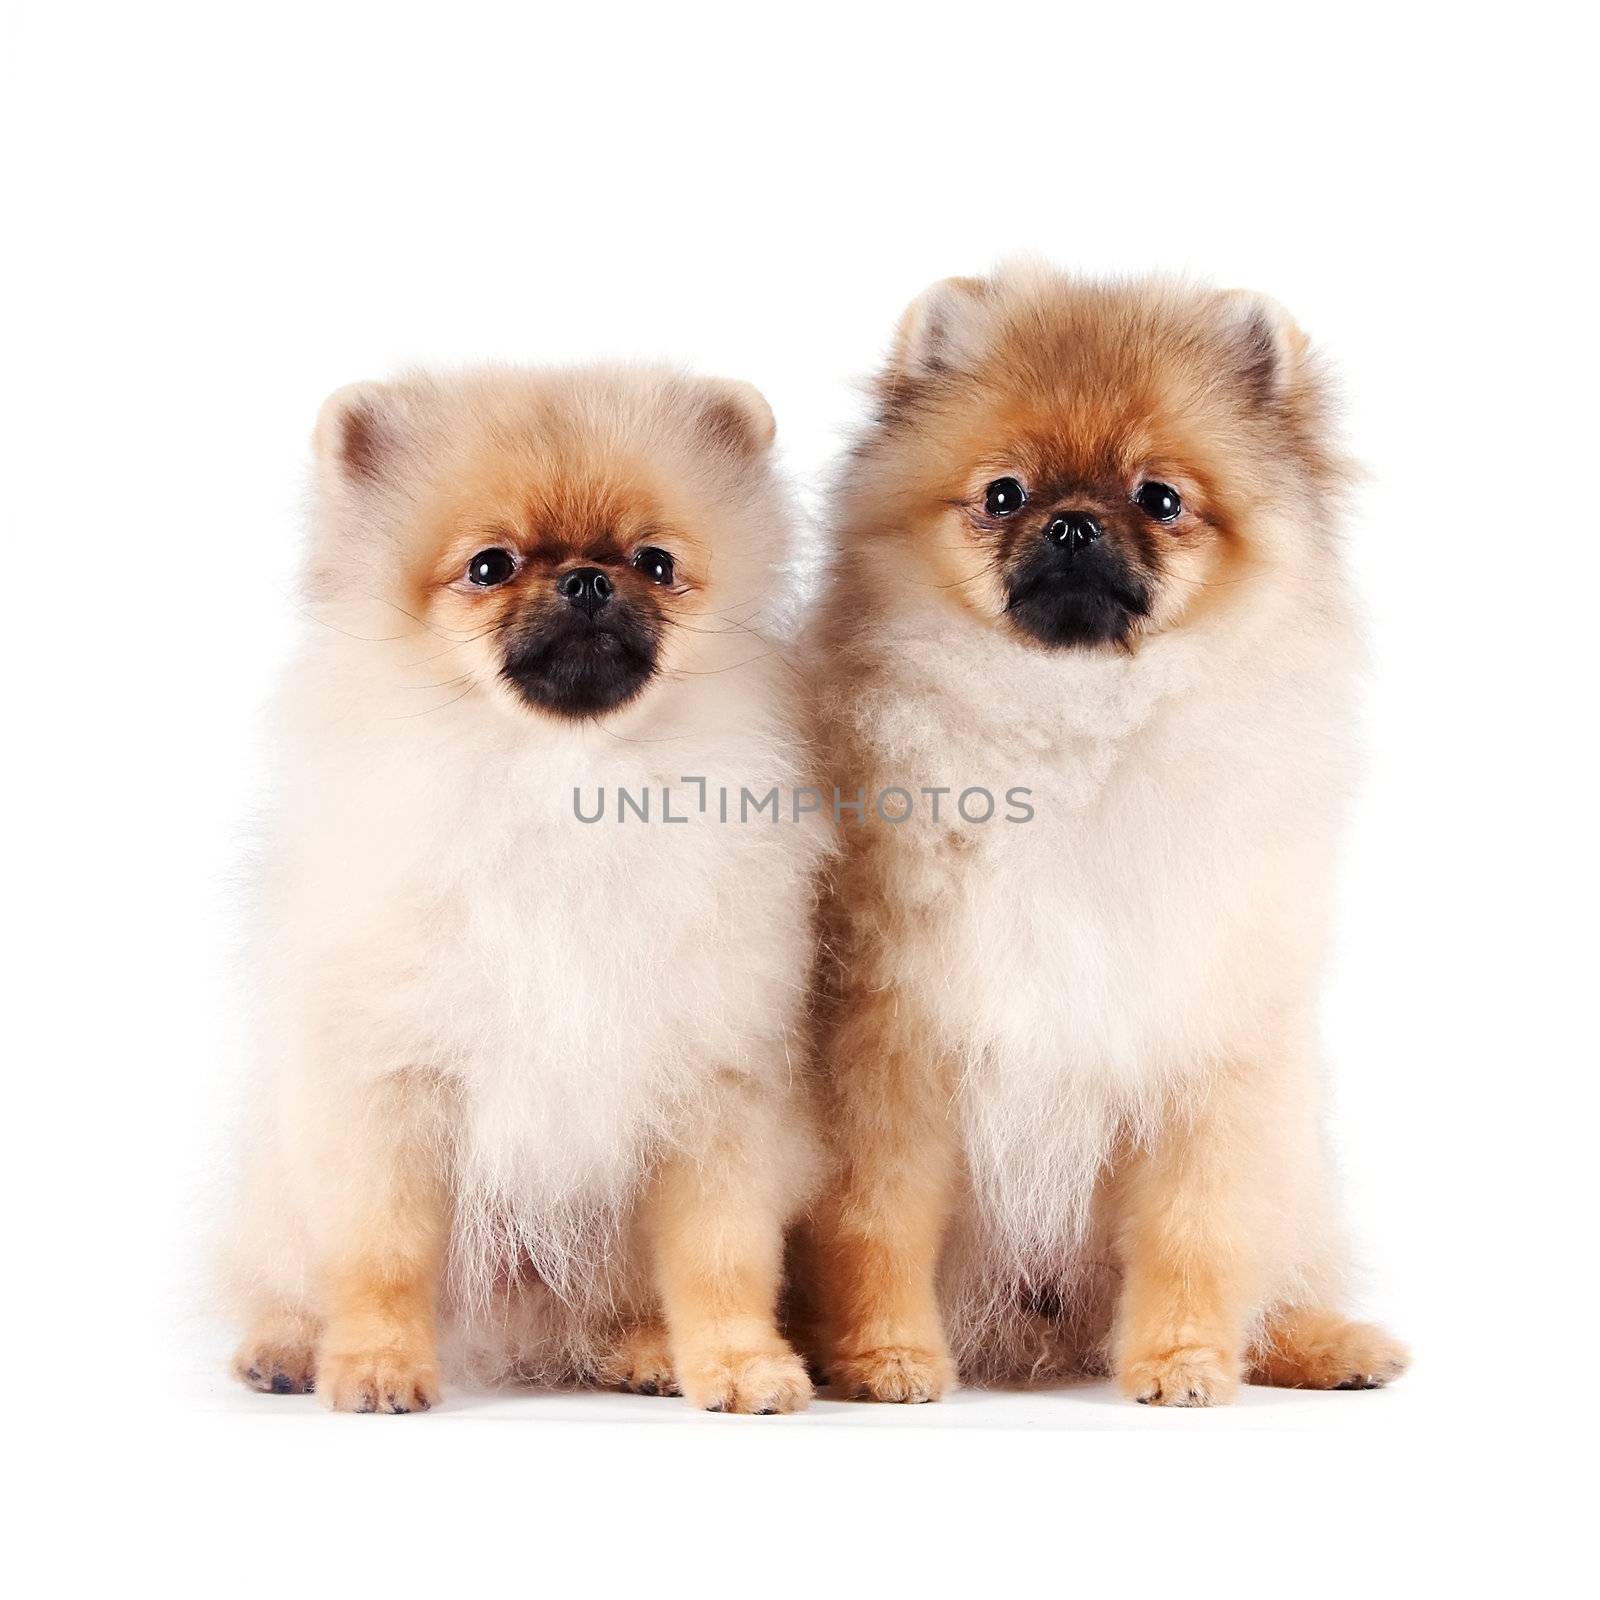 The puppies of a spitz-dog sits on a white background